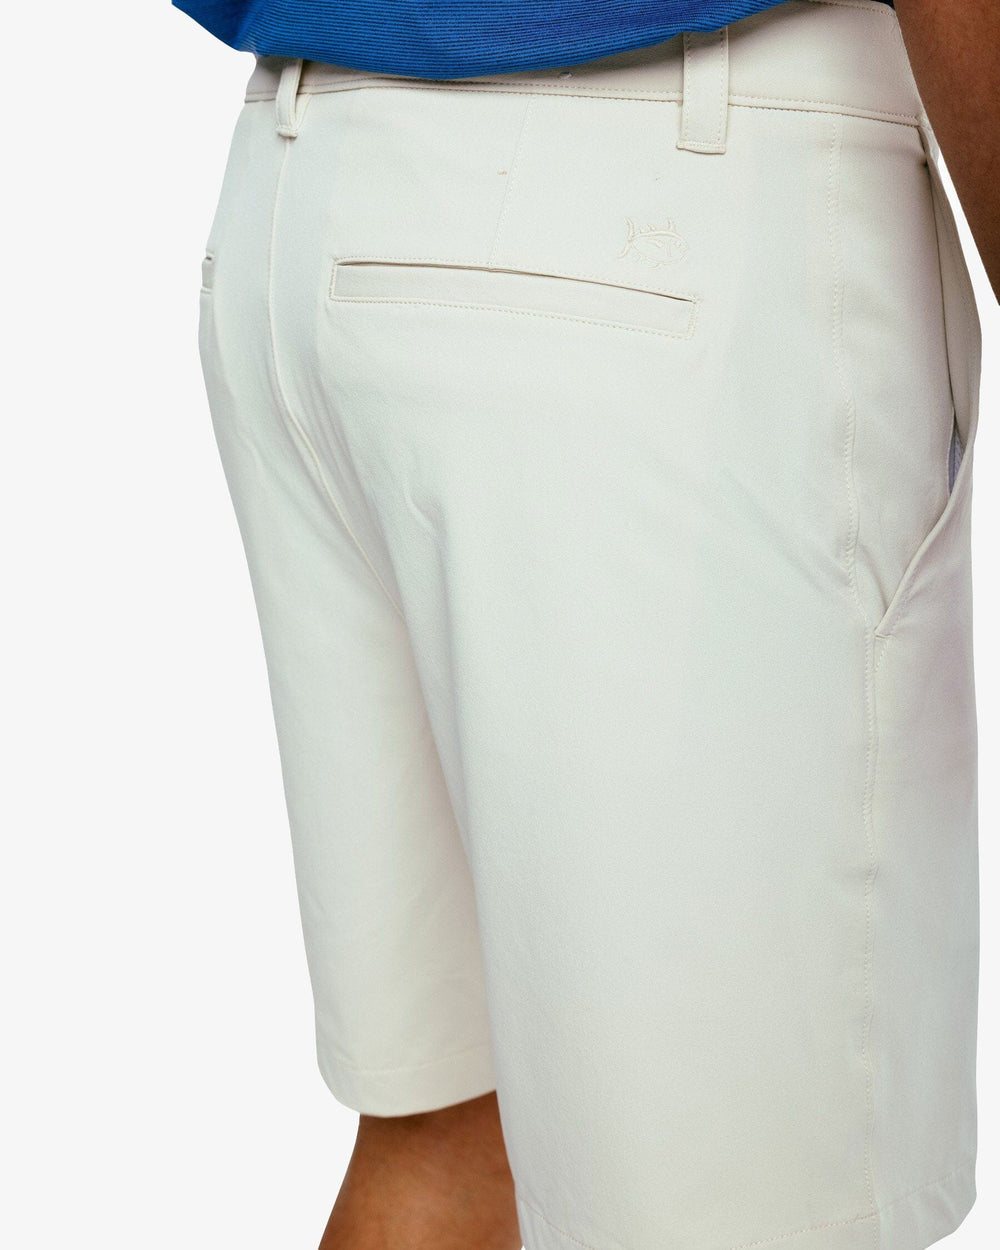 The pocket of the Men's Gulf 8 Inch Brrr Performance Short by Southern Tide - Stone